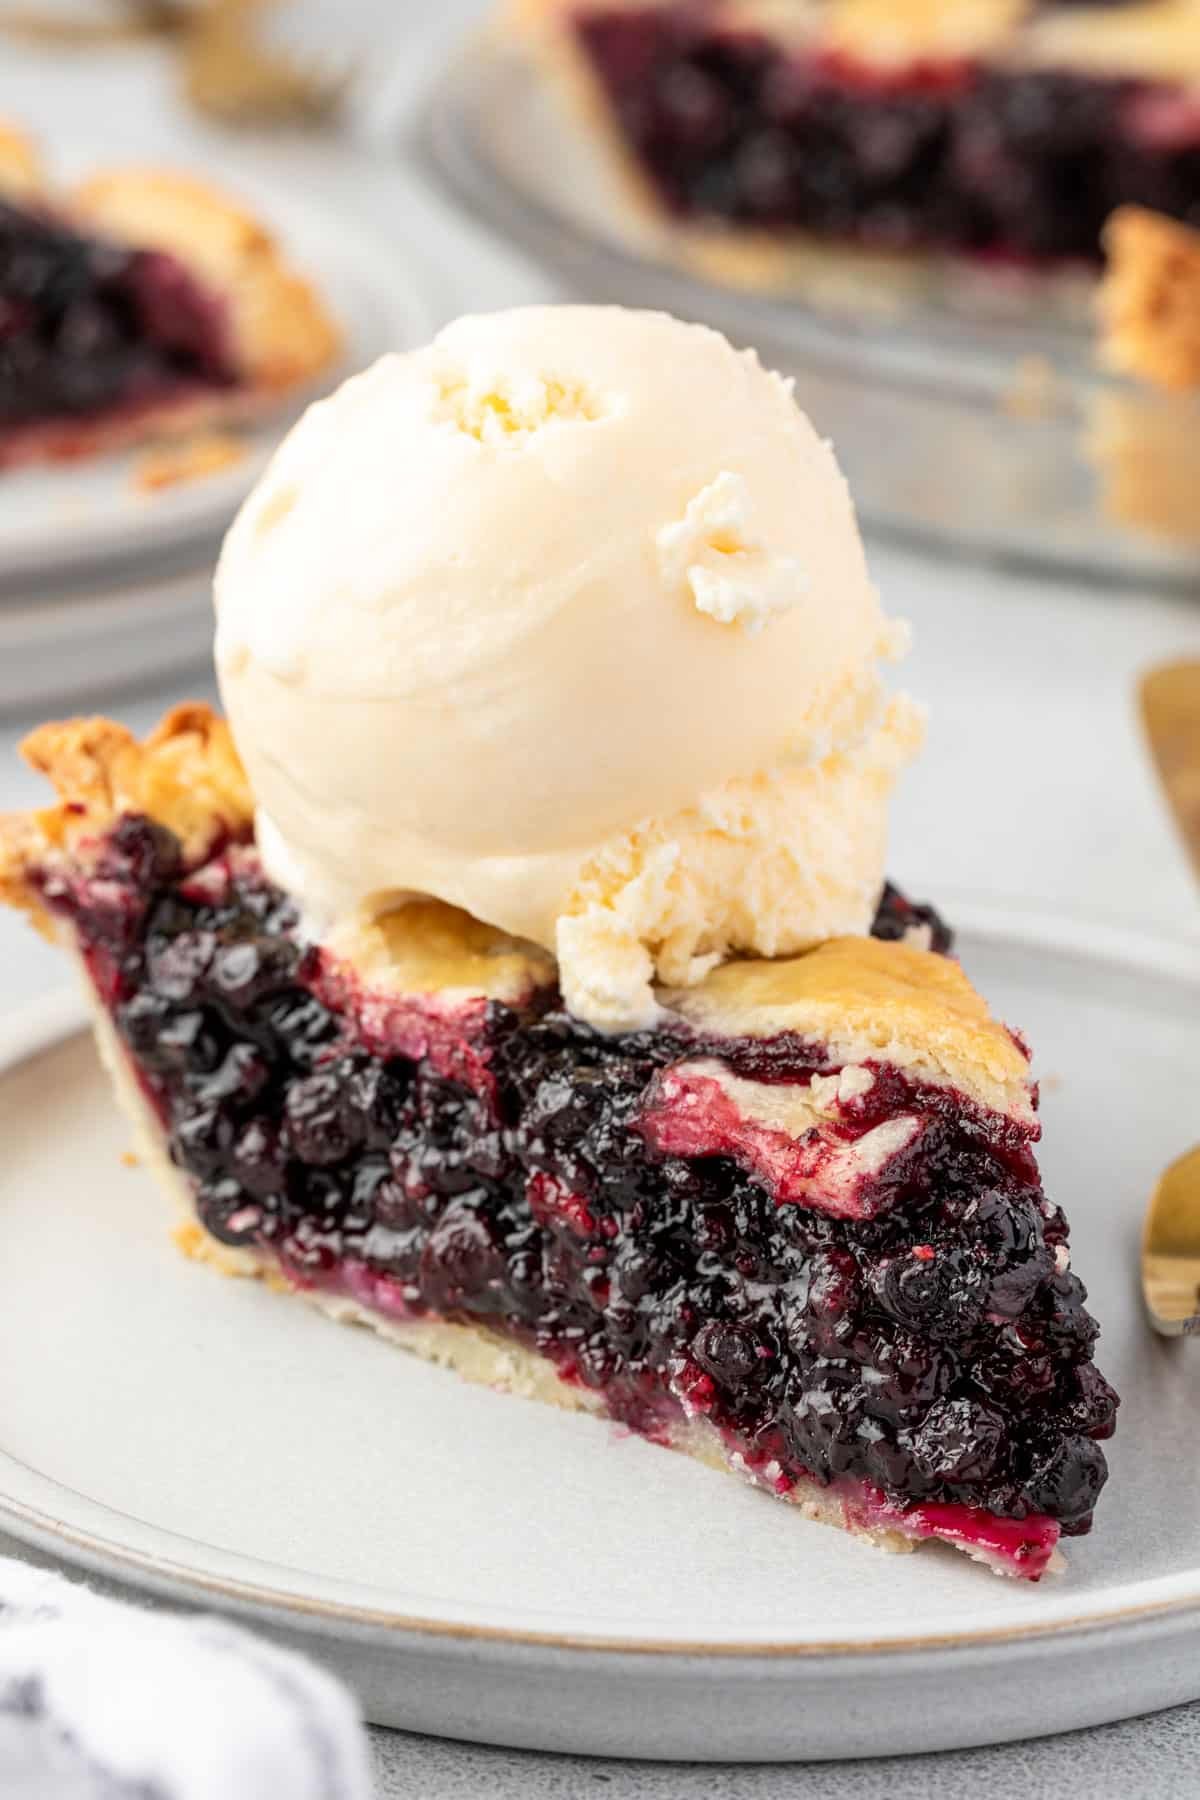 A slice of pie topped with a big scoop of vanilla ice cream, with another slice of pie and the whole pie in background.